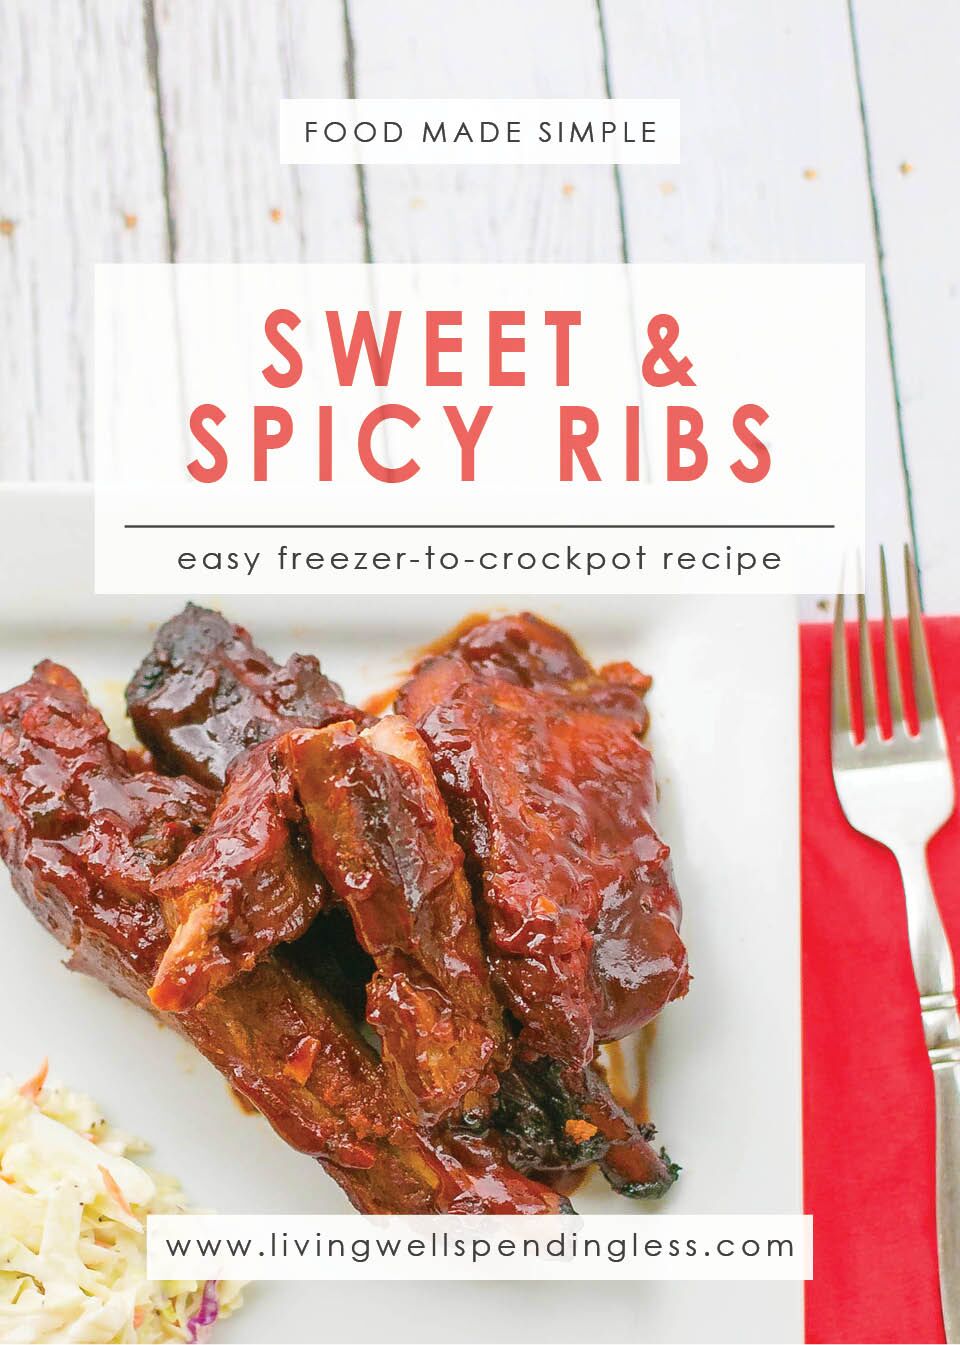 Sweet & Spicy Ribs | Easy Freezer-to-Crockpot Recipe | Barbecue Ribs | Meat Recipes